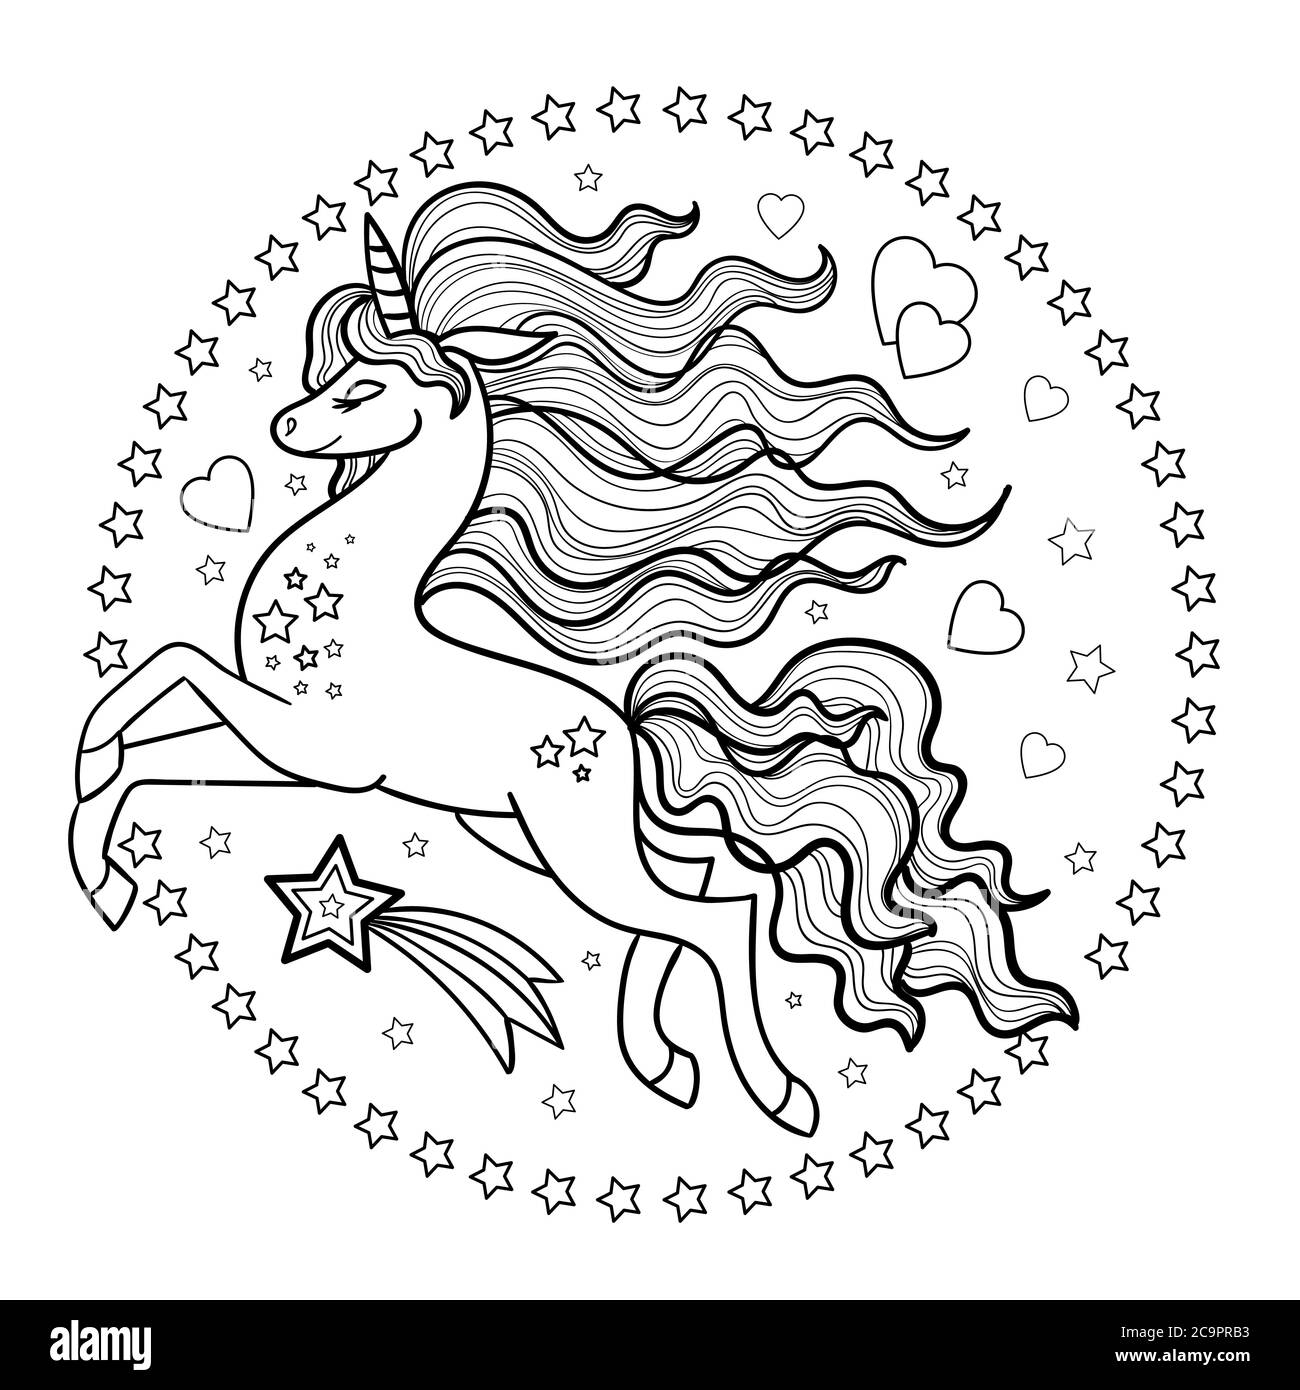 Running unicorn in a round frame of stars. Doodle vector illustration. Cartoon character. Contour image. Black and white. For the design of prints, po Stock Vector